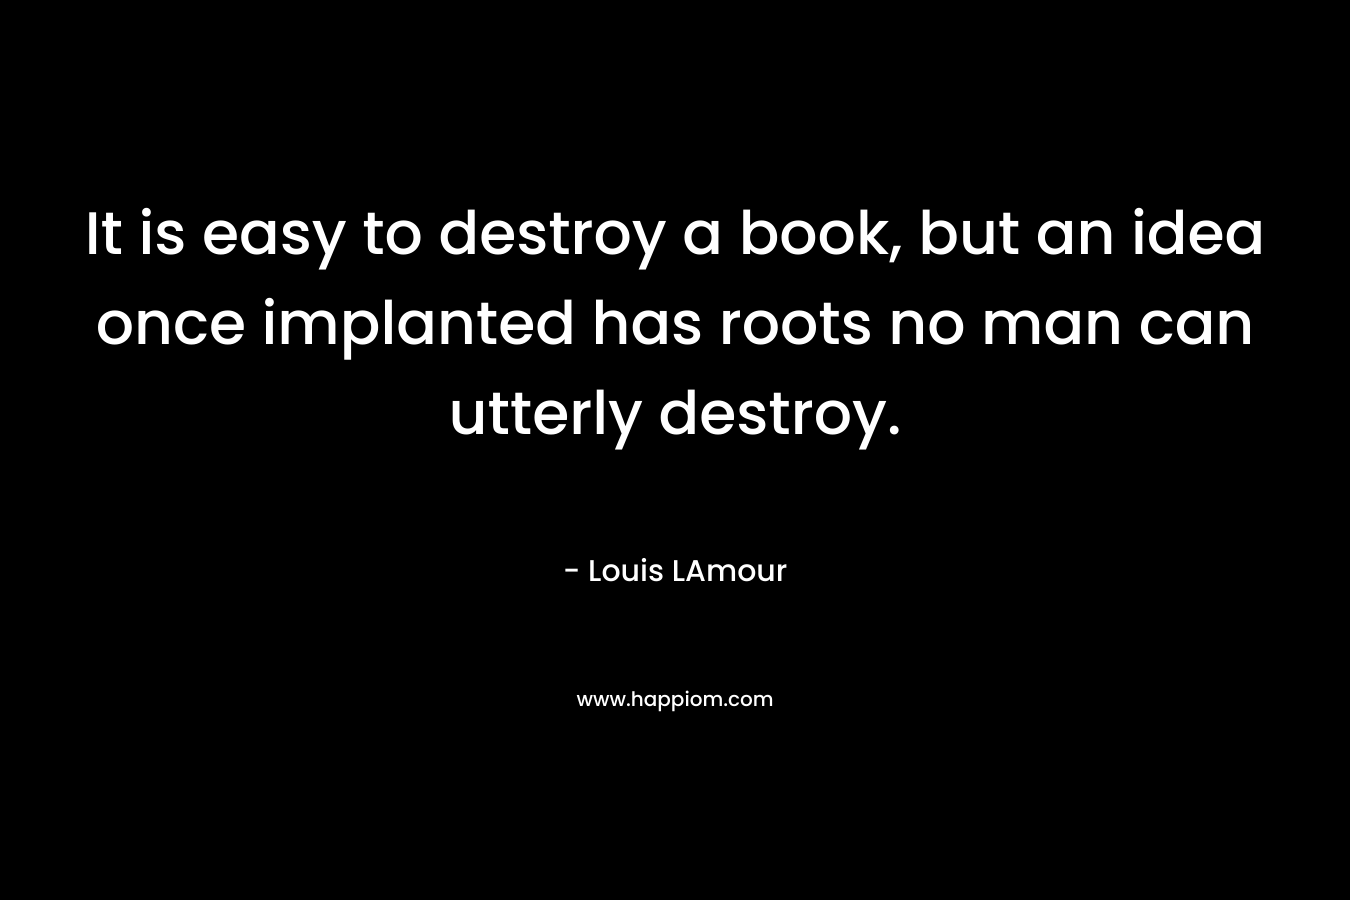 It is easy to destroy a book, but an idea once implanted has roots no man can utterly destroy. – Louis LAmour